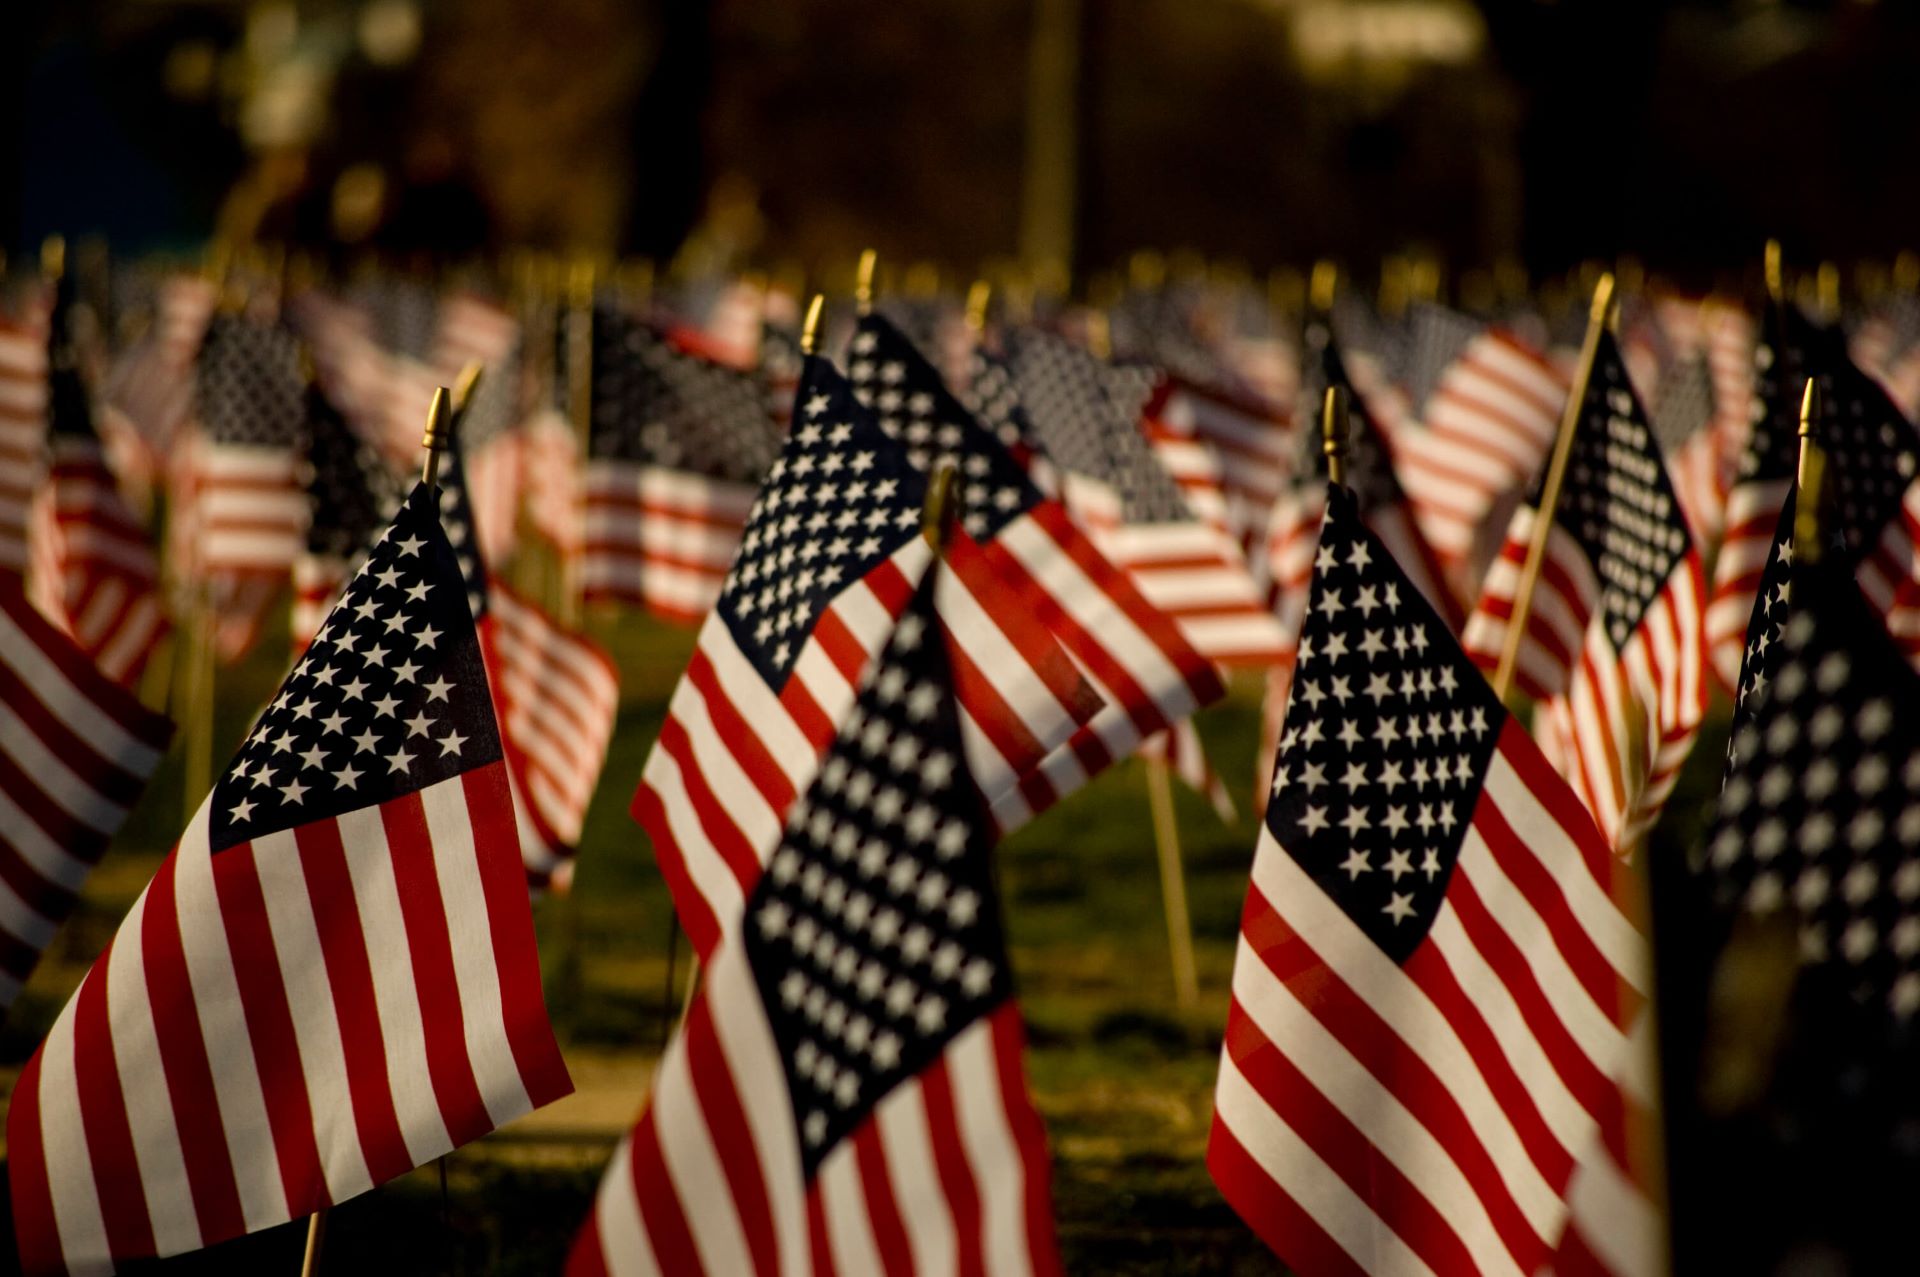 A field of american flags with the stars and stripes.